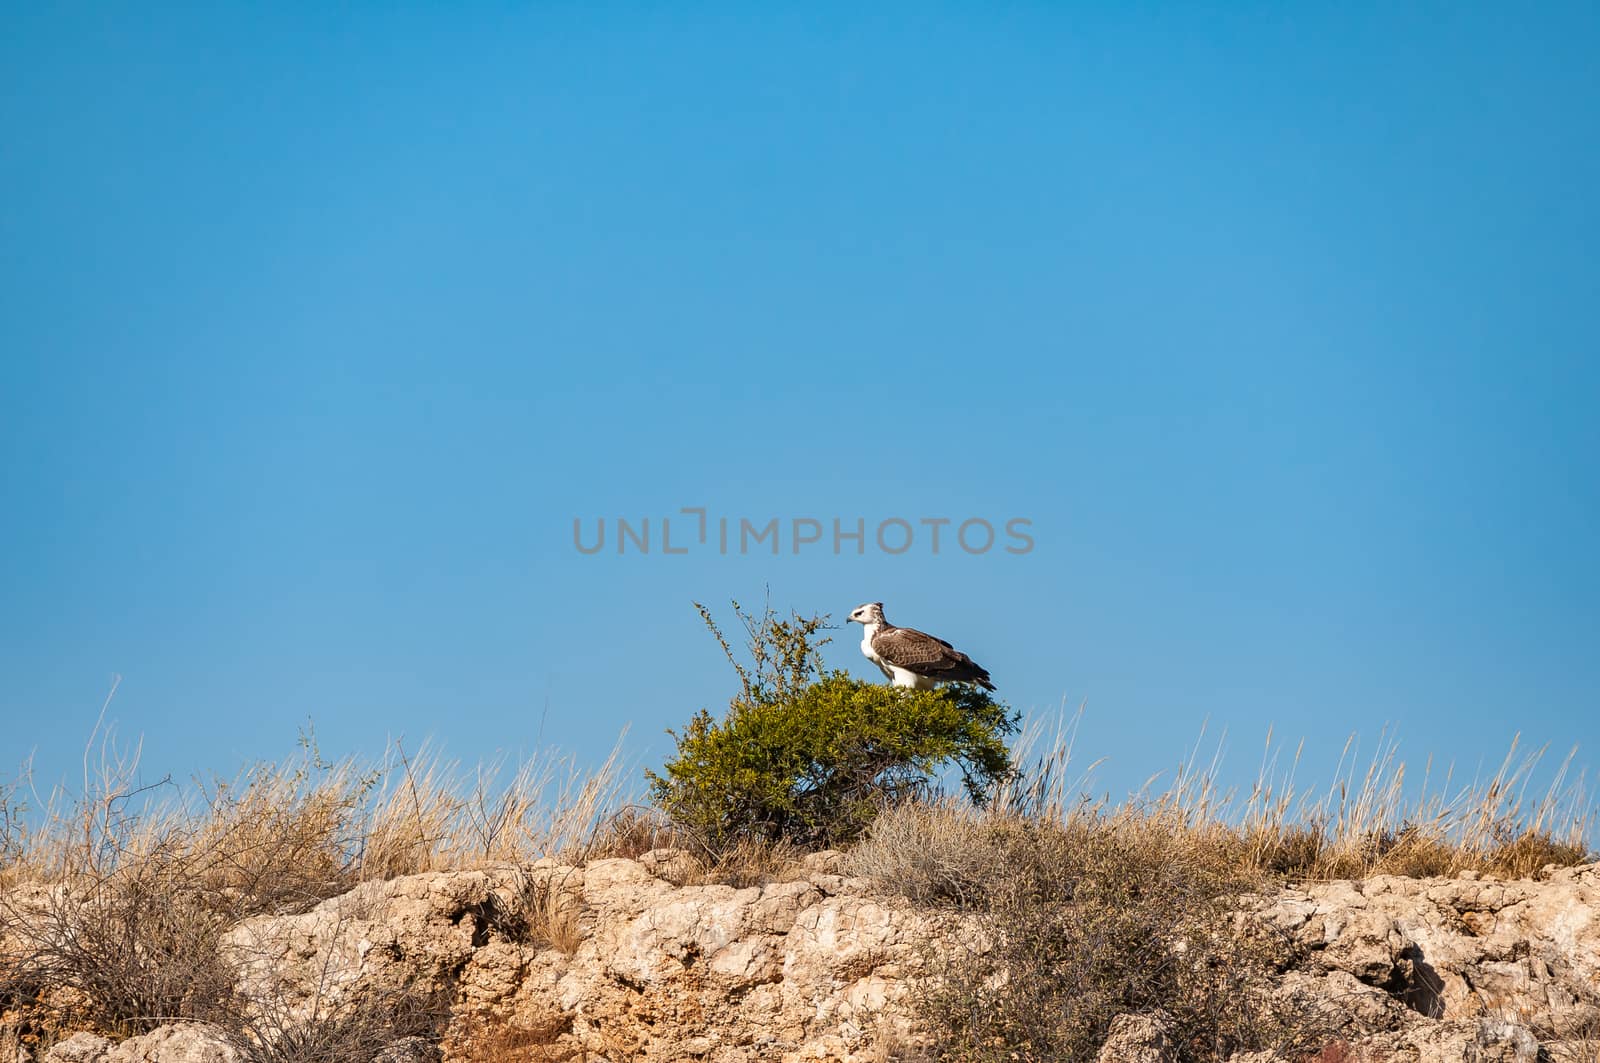 Immature martial eagle, Polemaetus bellicosus, in the Kgalagadi by dpreezg